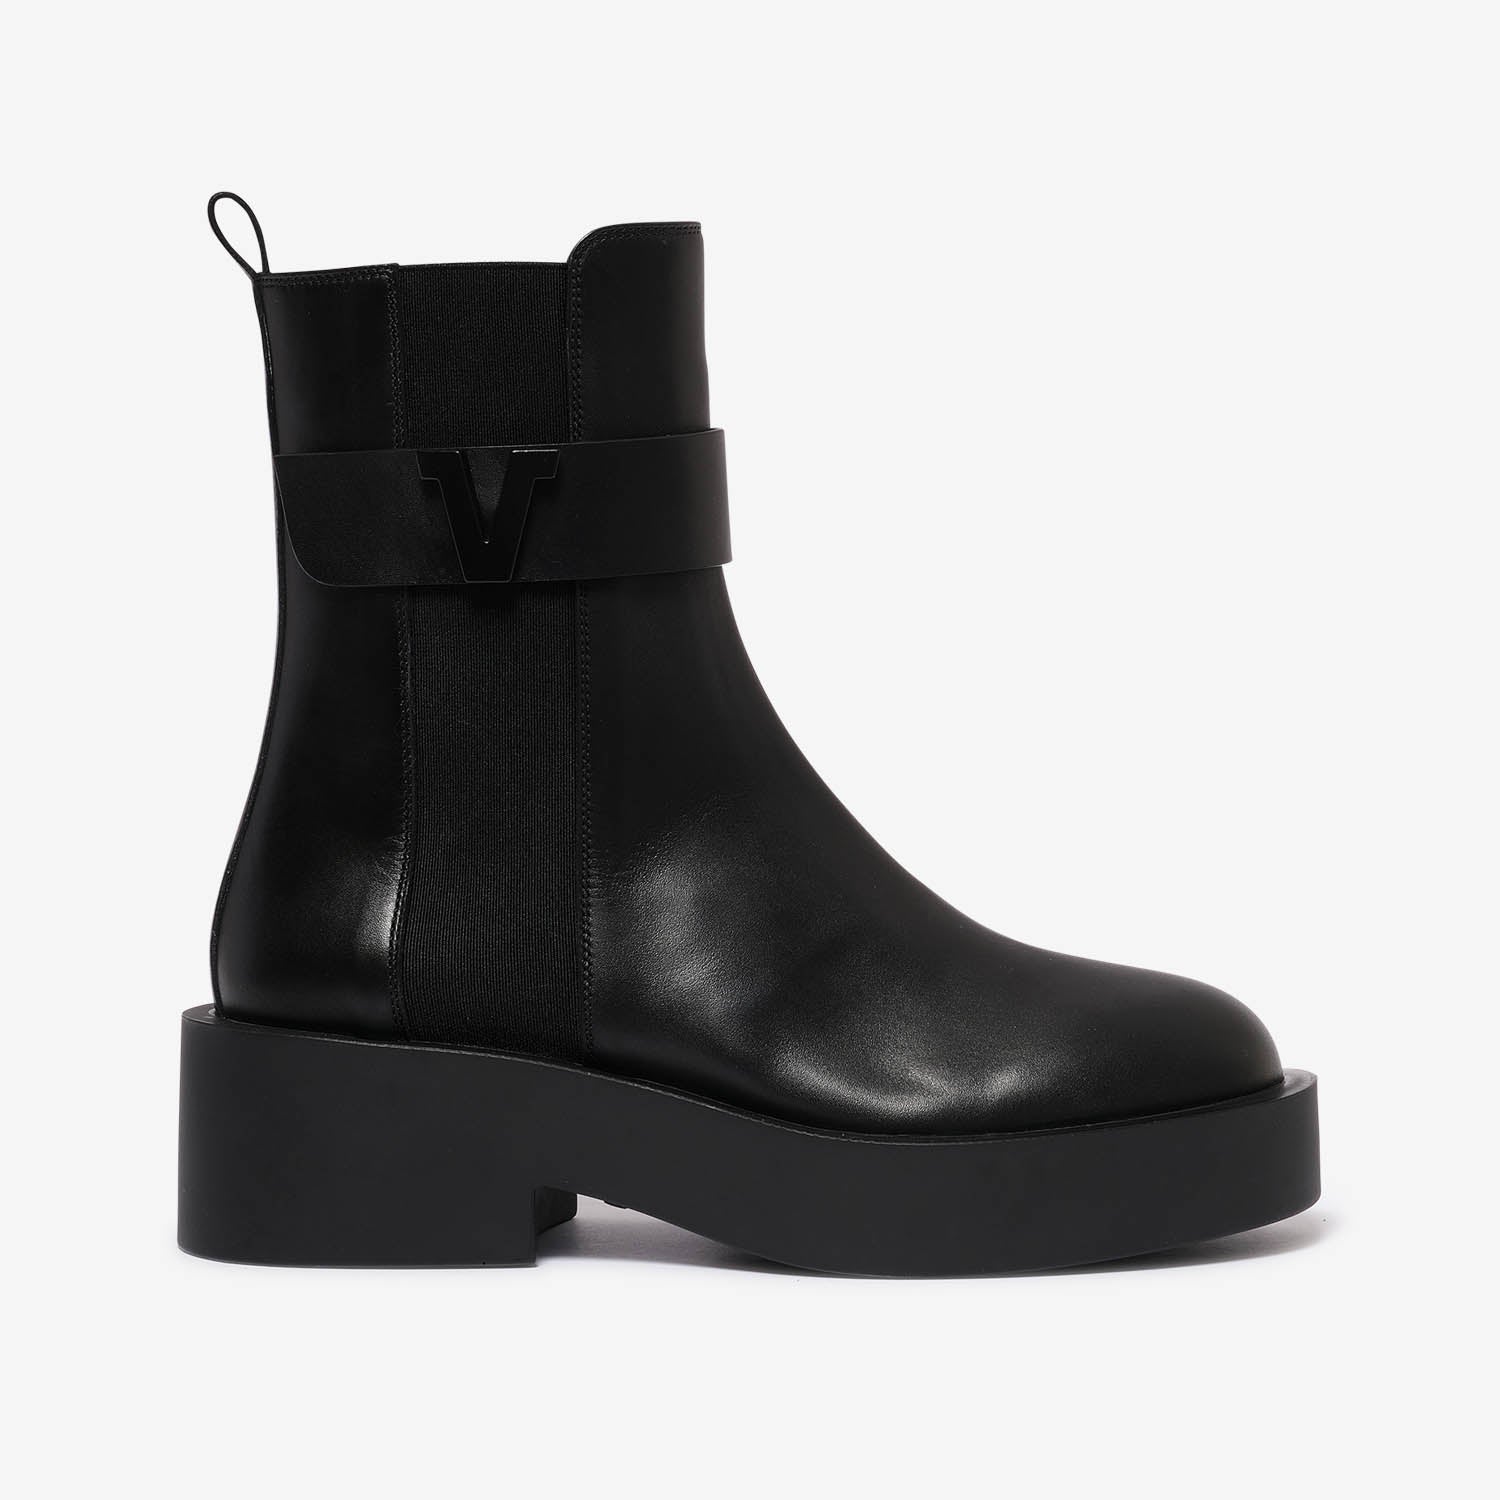 Aelia | Ankle boot in pelle con fodera in lana donna